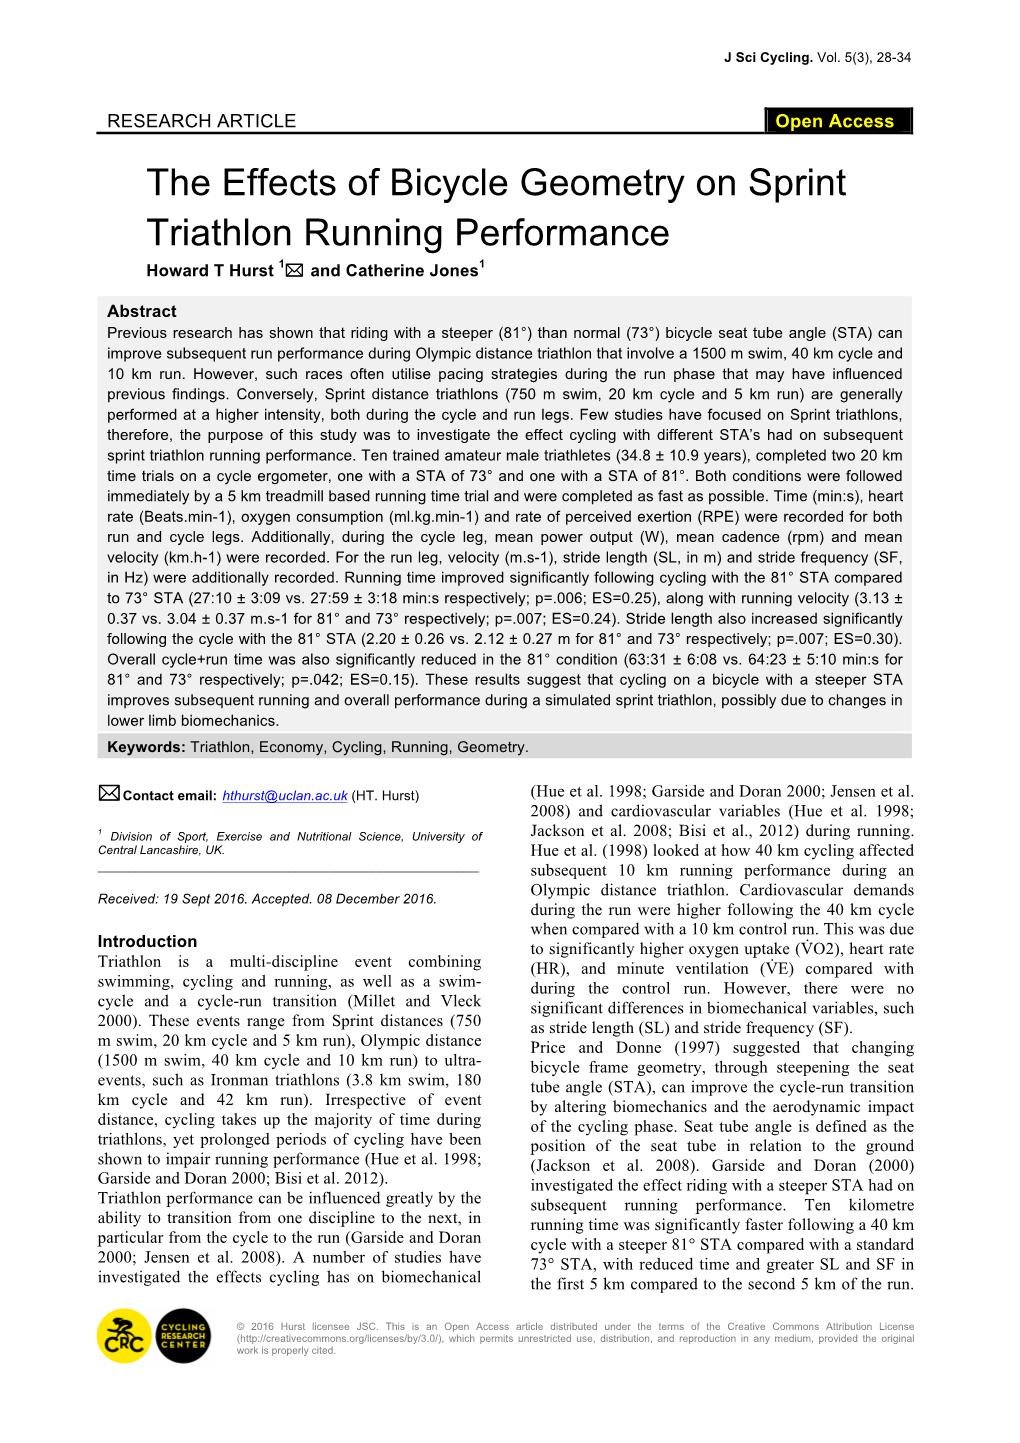 The Effects of Bicycle Geometry on Sprint Triathlon Running Performance Howard T Hurst 1* and Catherine Jones1